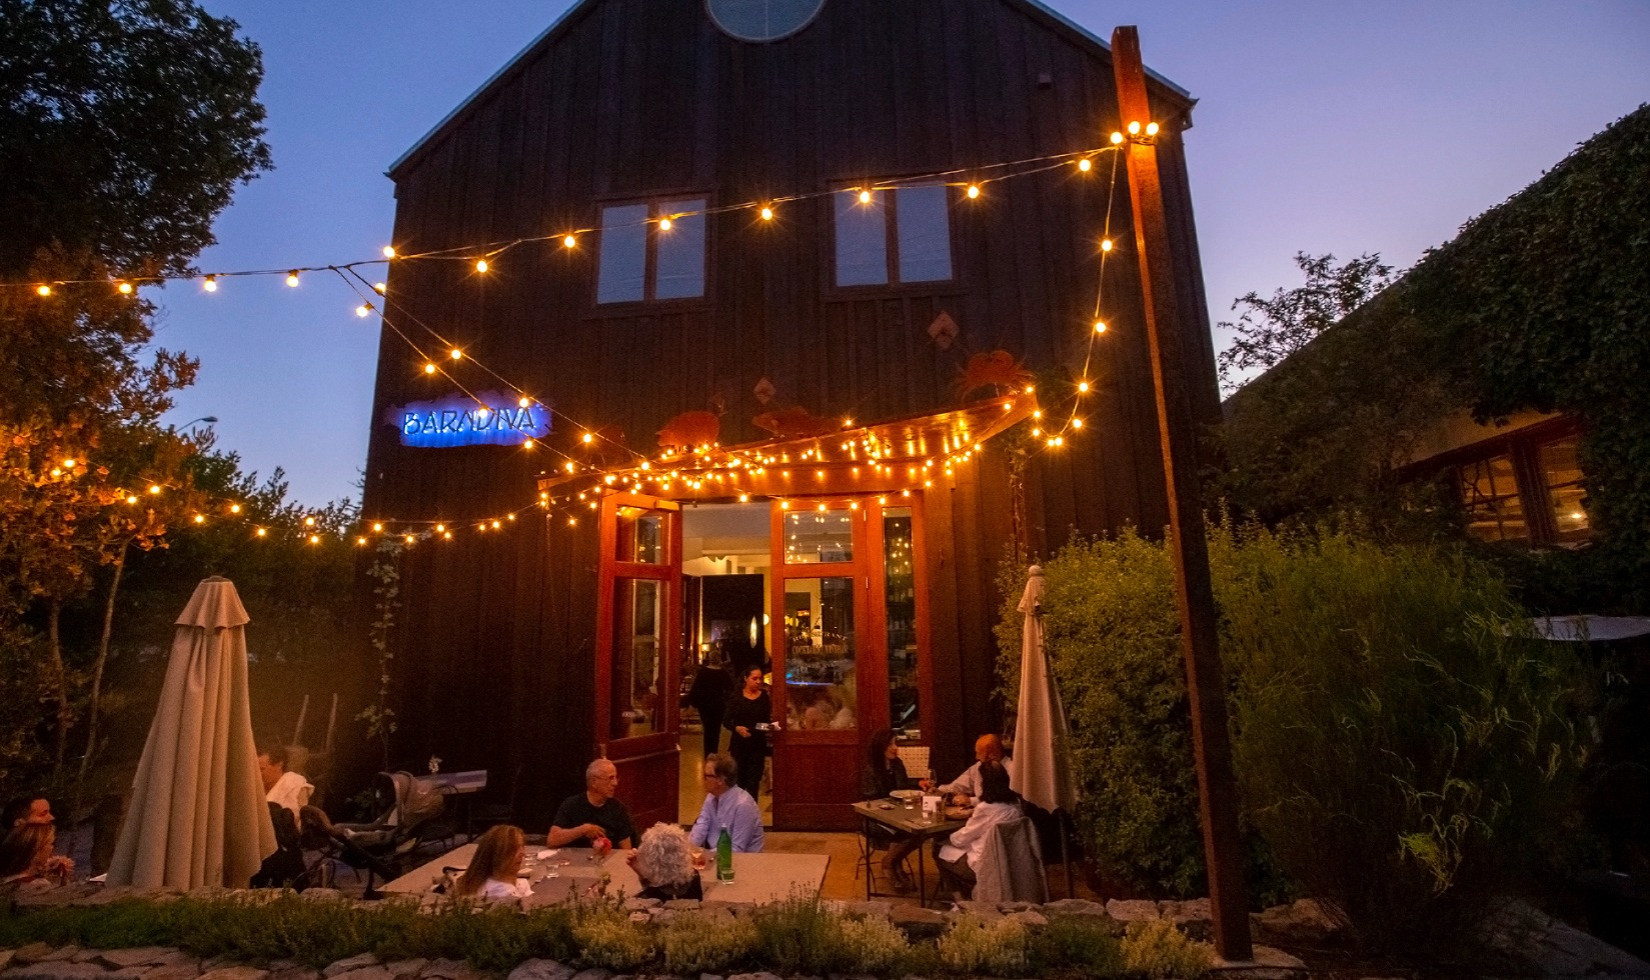 diners sitting around outdoors tables in front of restaurant styled as a traditional red barn